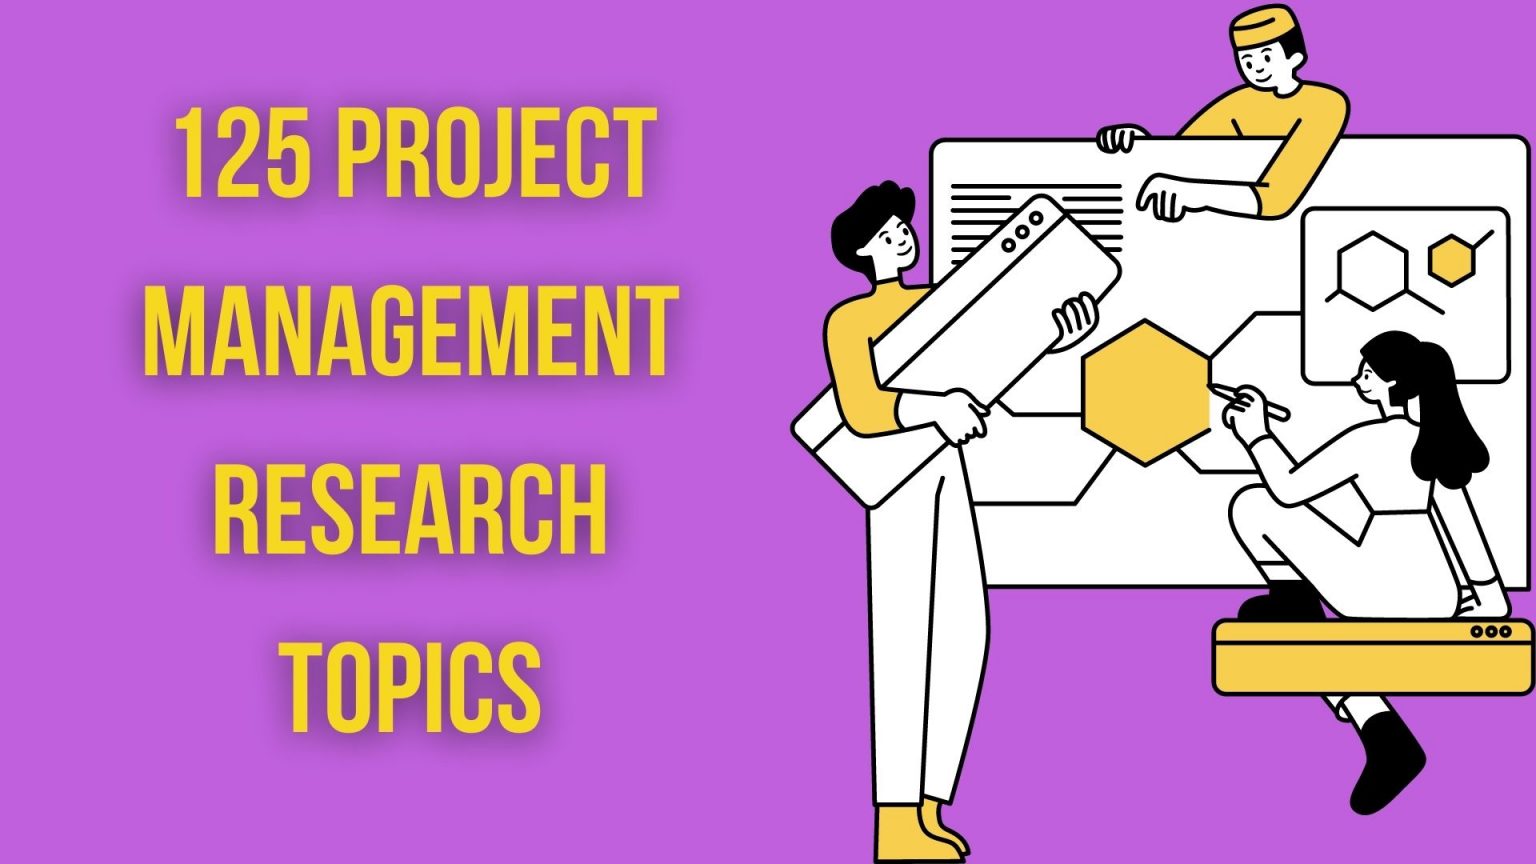 project topics for education management